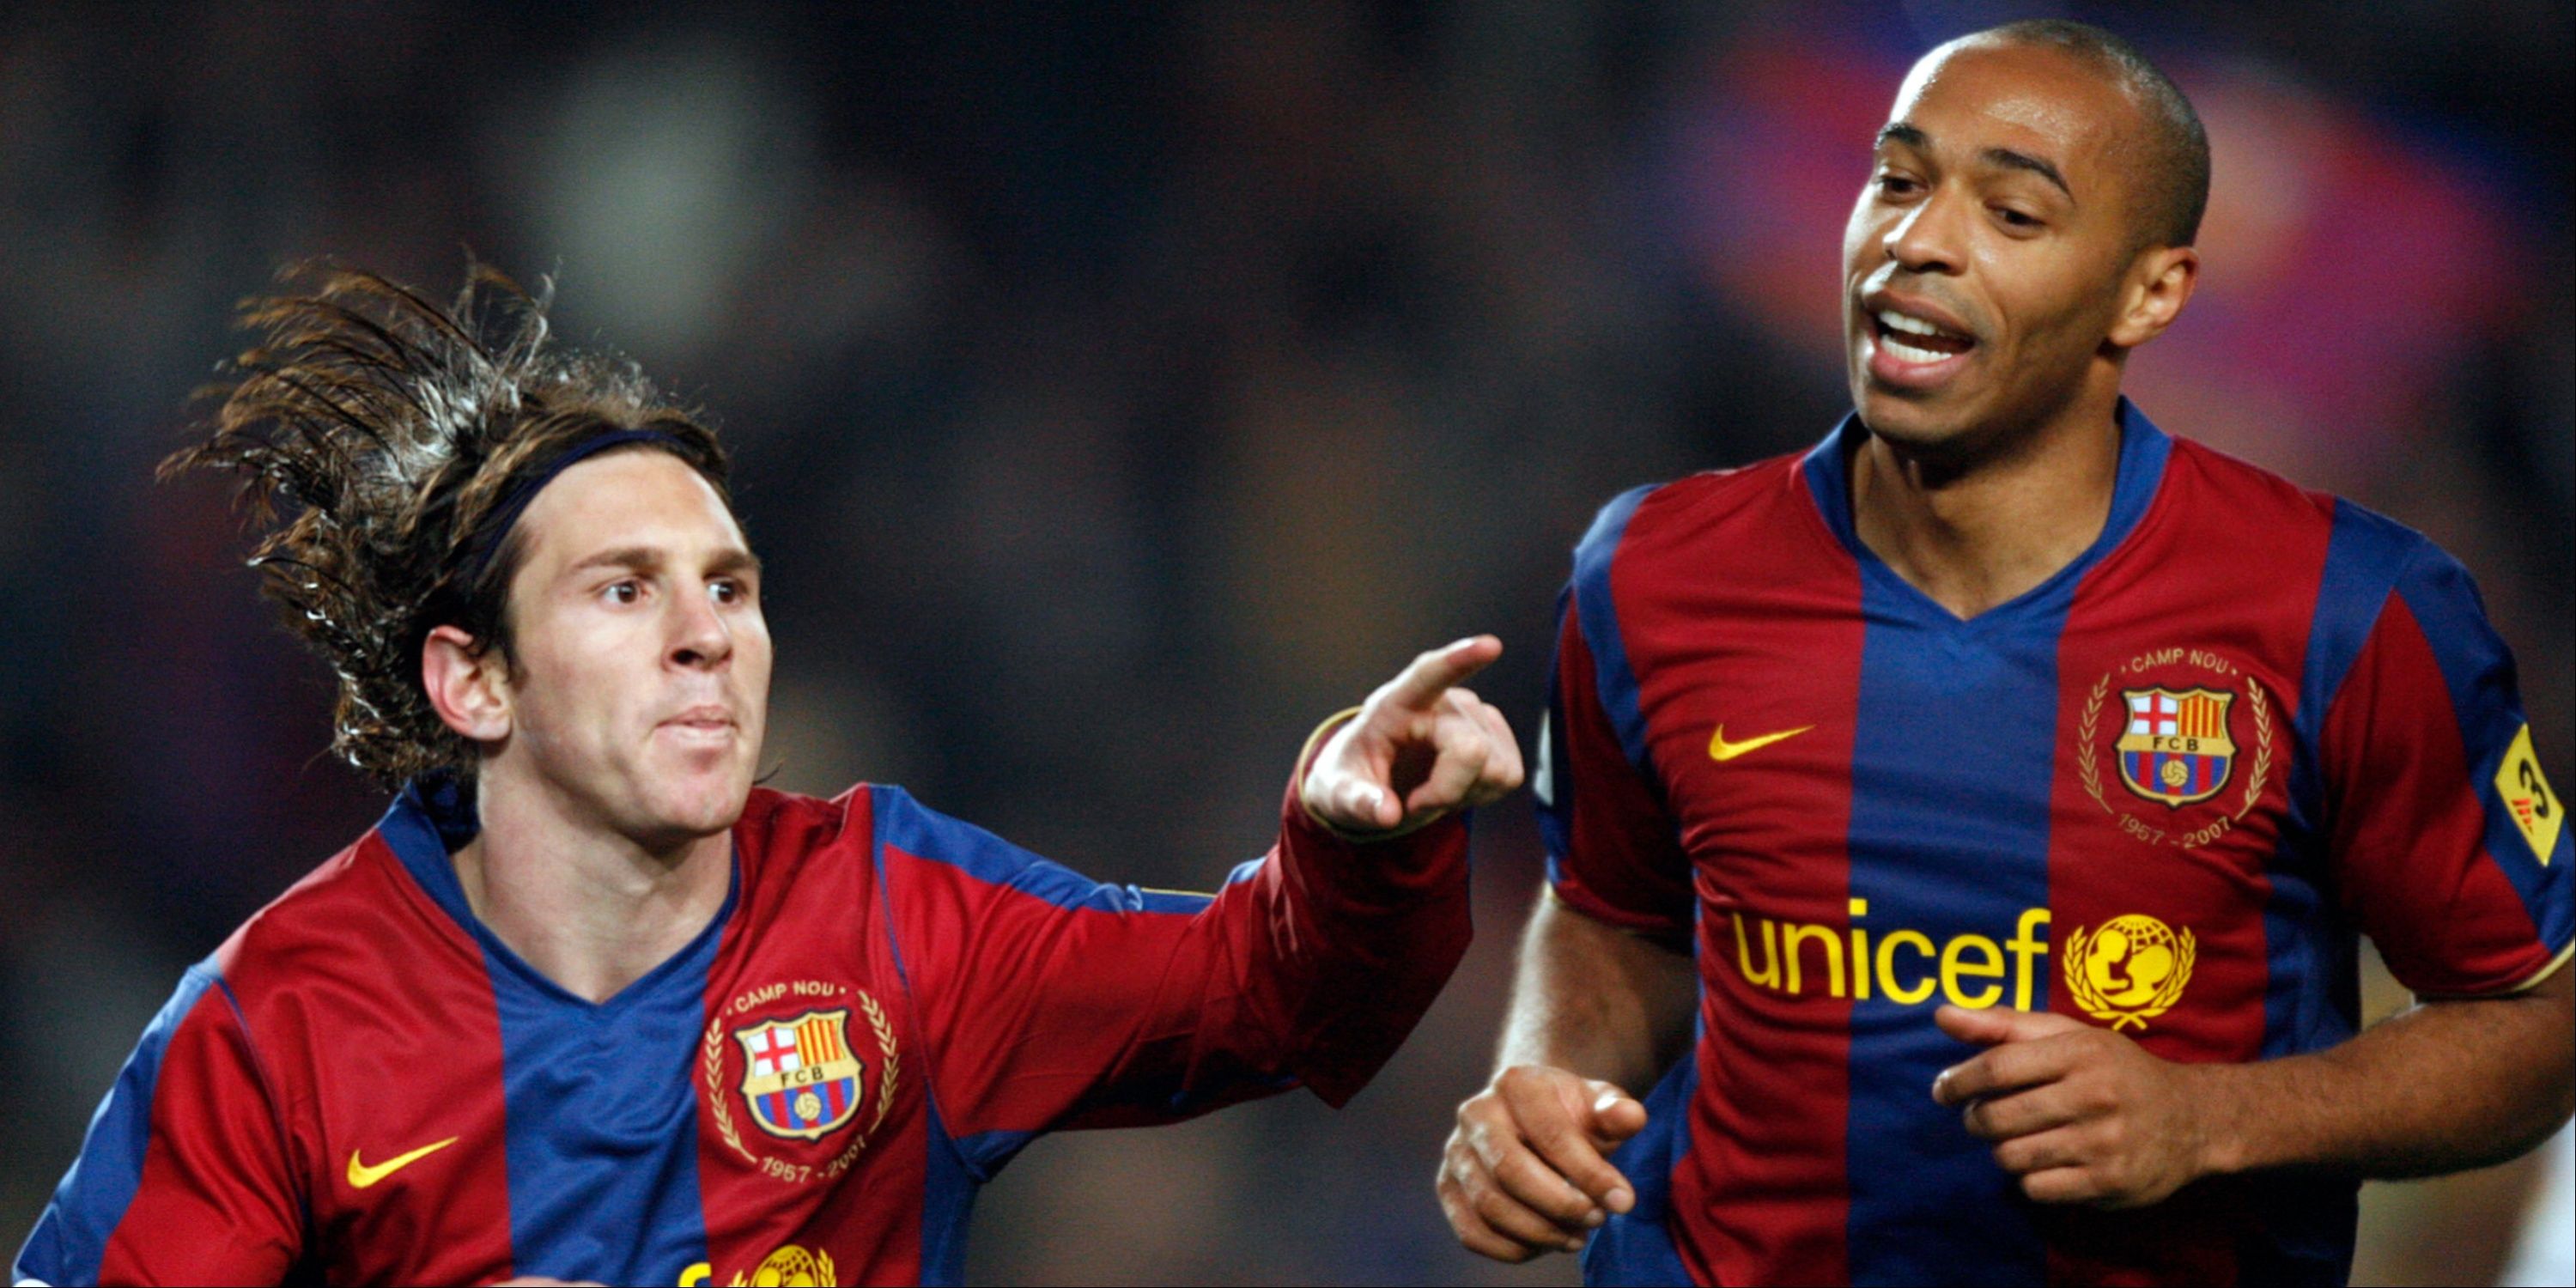 Thierry Henry and Lionel Messi celebrate a Barcelona goal